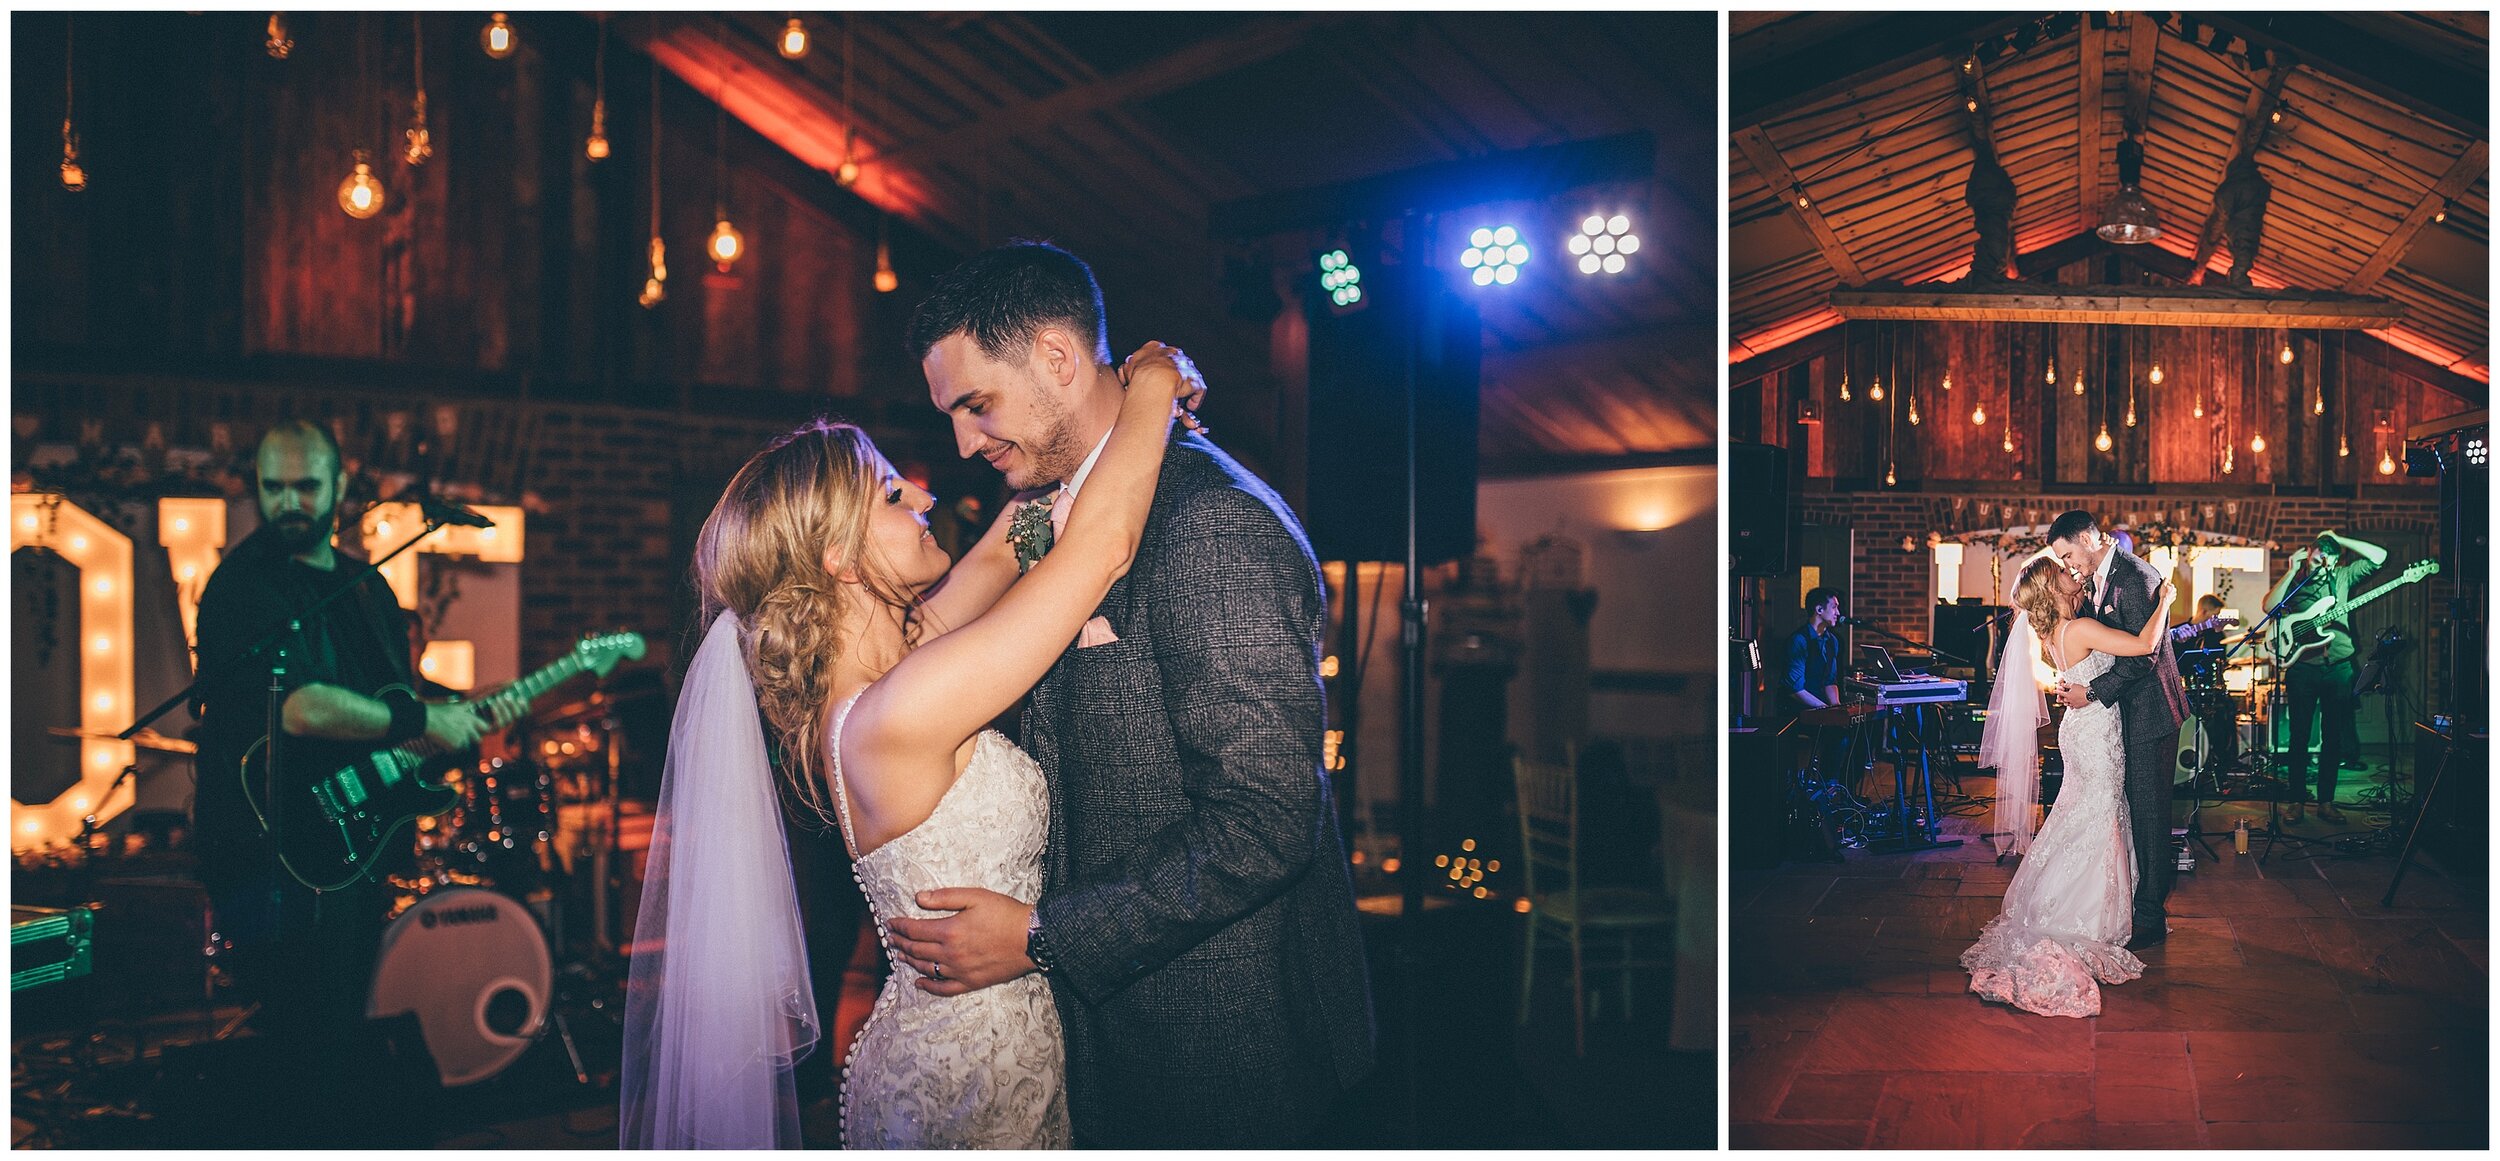 First Dance at Owen House wedding Barn in Mobberly, Cheshire.